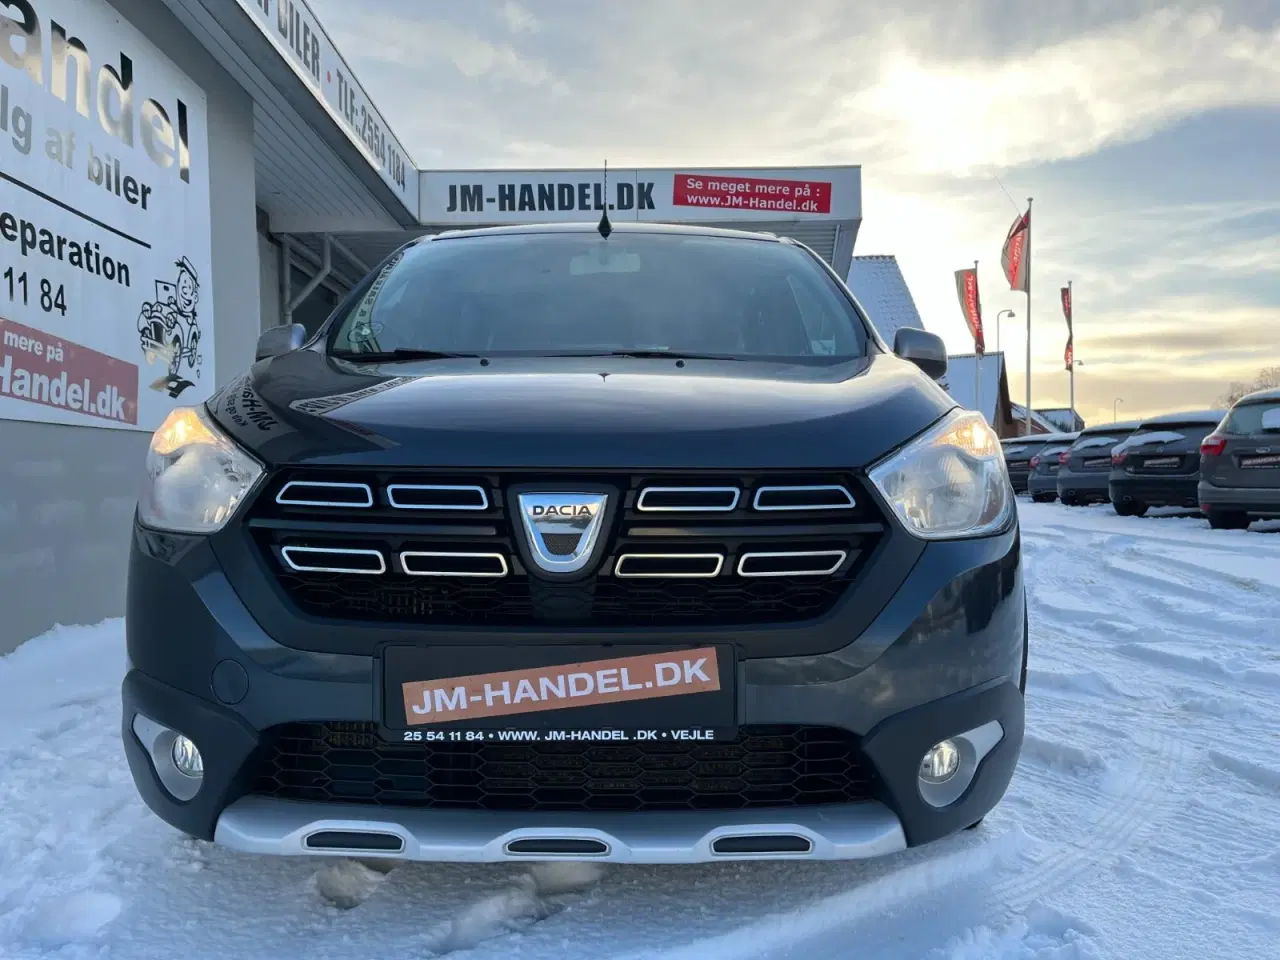 Billede 3 - Dacia Lodgy 1,5 dCi 90 Family Edition 7prs